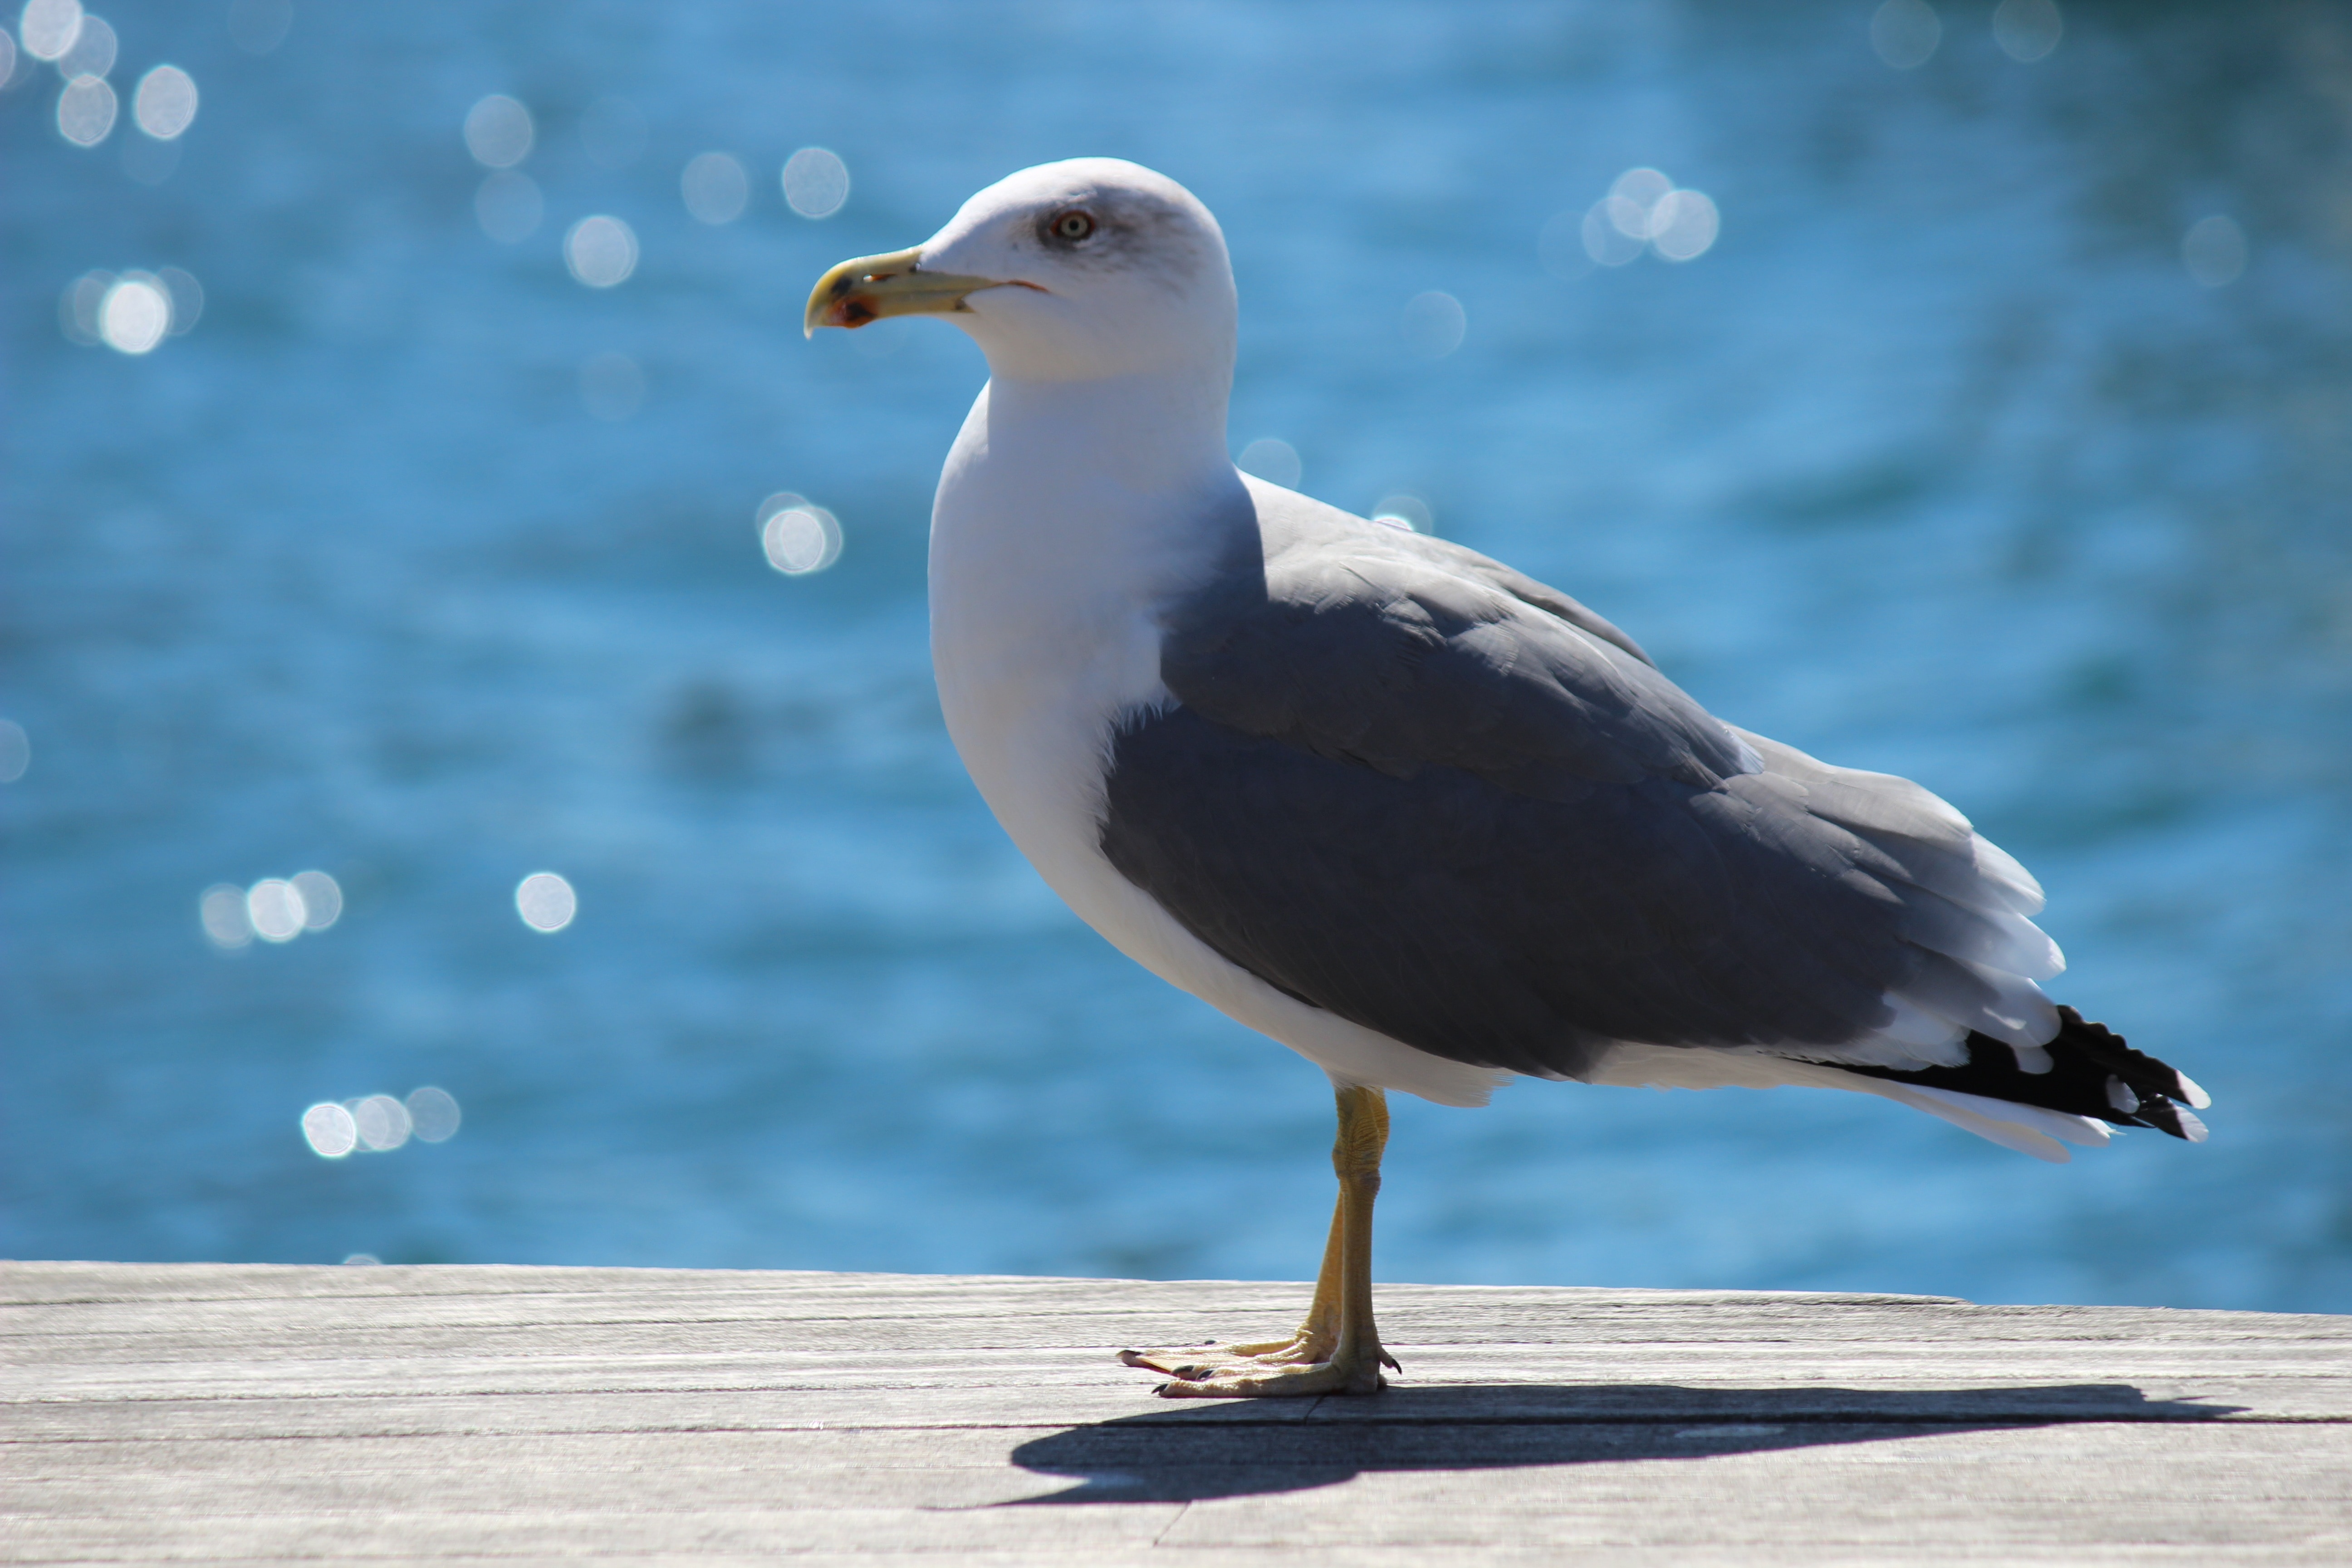 Fly, Gull, Seagull, Nature, Water, Sea, bird, animals in the wild